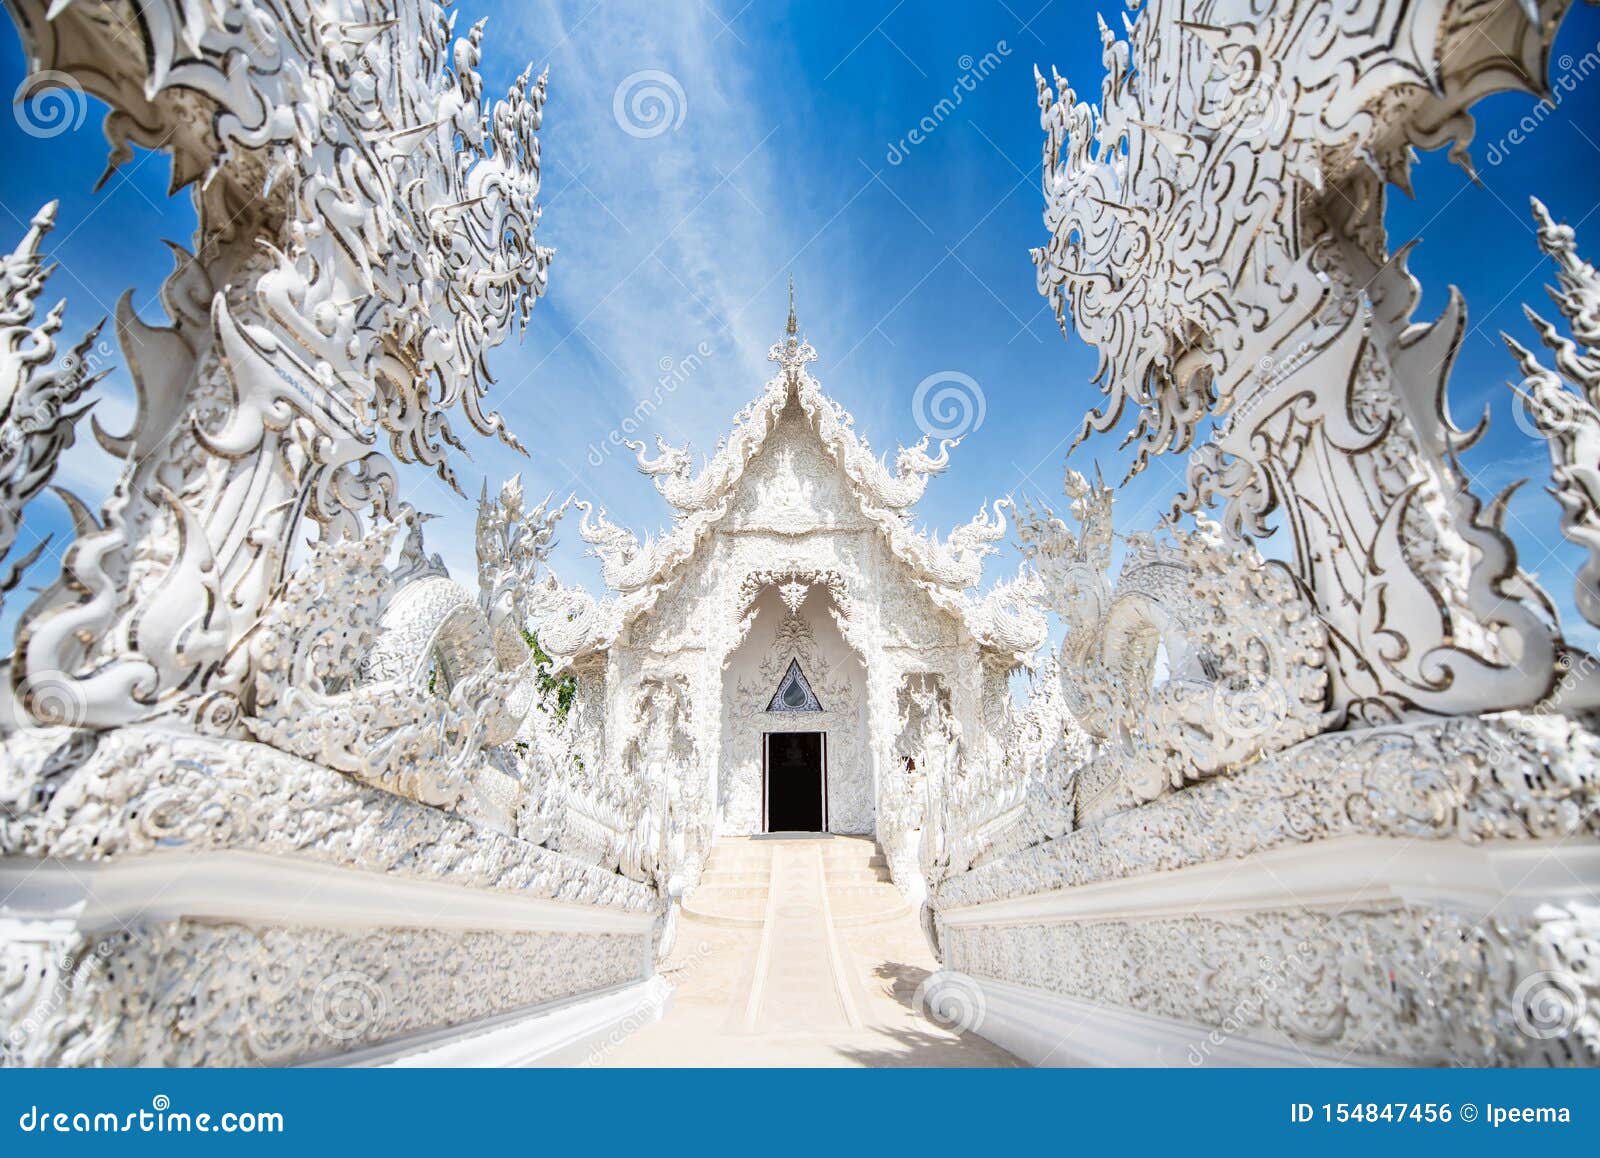 wat rong khun, white temple is a contemporary unconventional buddhist temple.